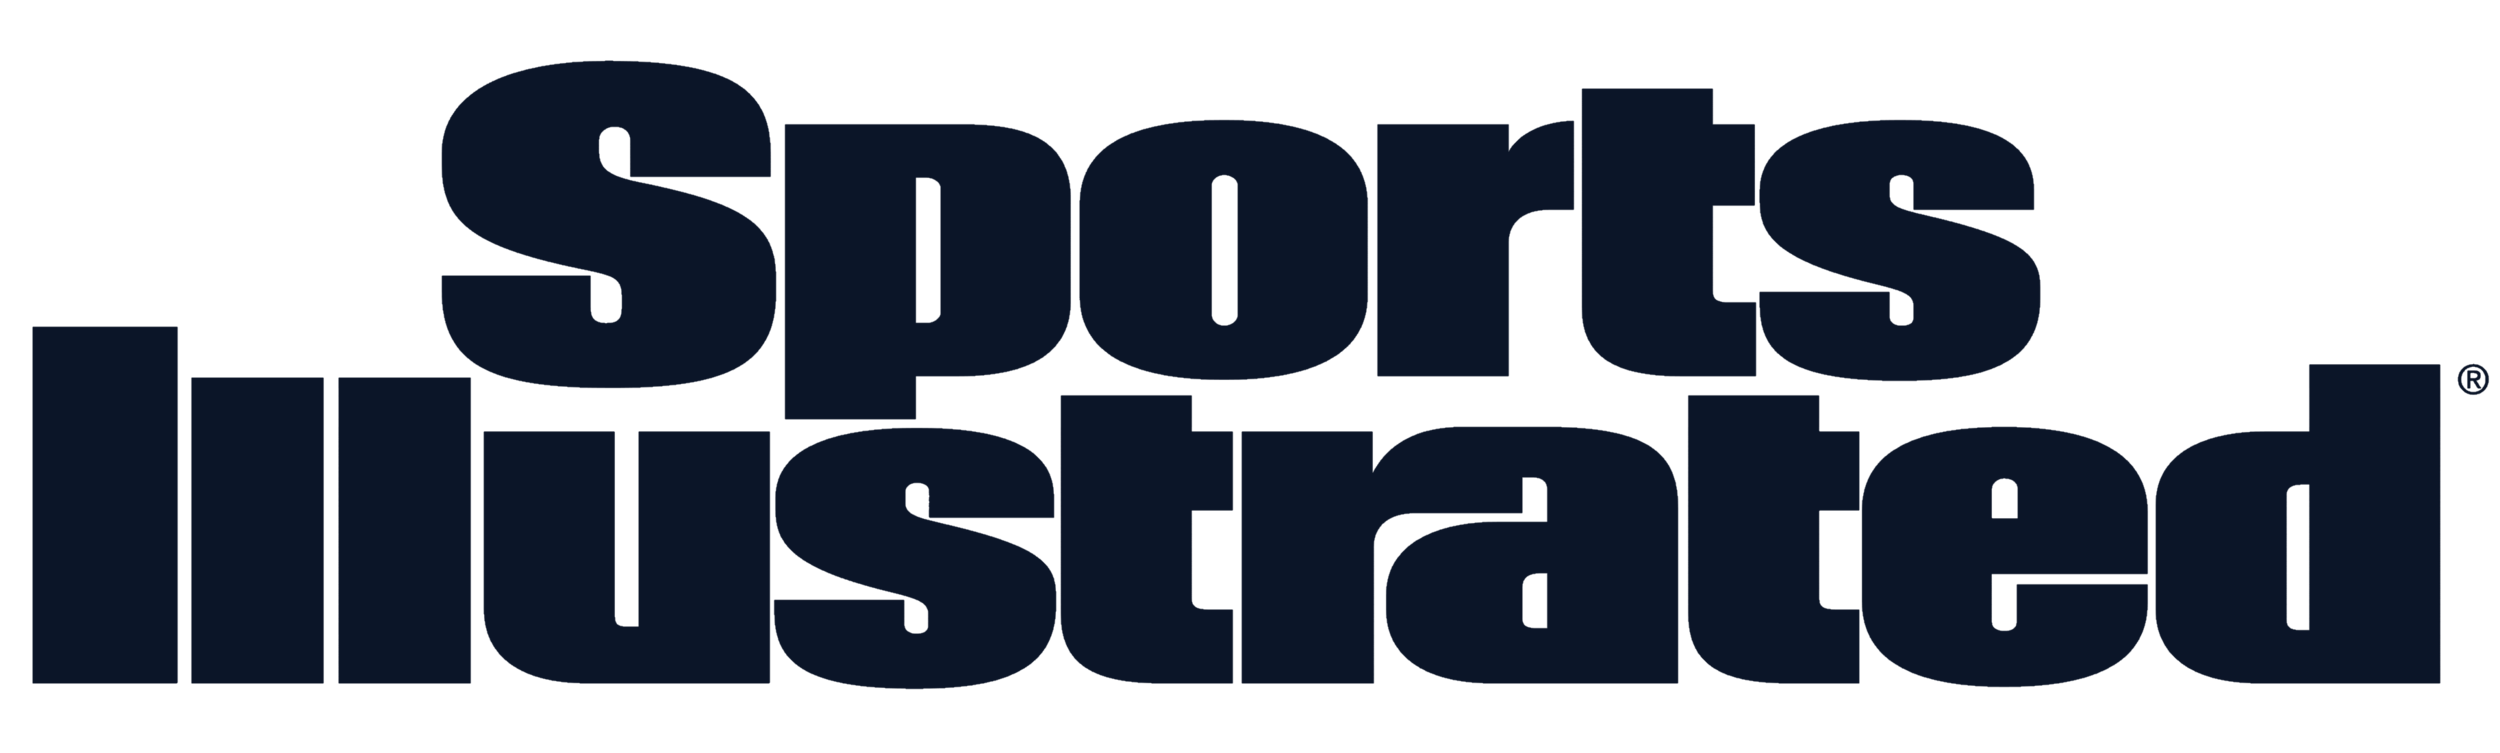 Sports_Illustrated_logo_blue.png